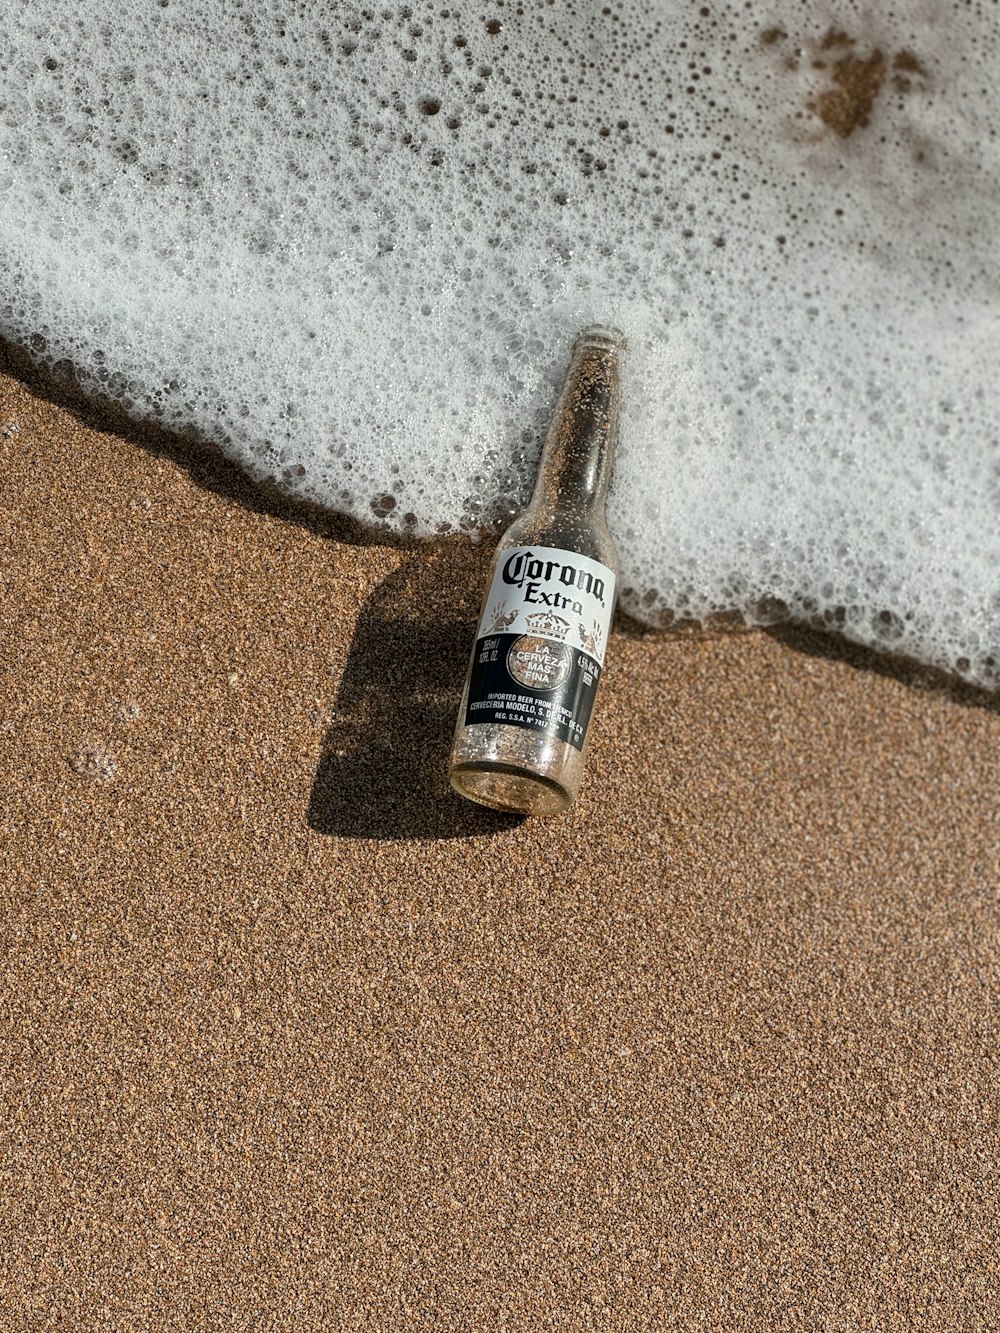 a bottle of beer sitting on top of a sandy beach